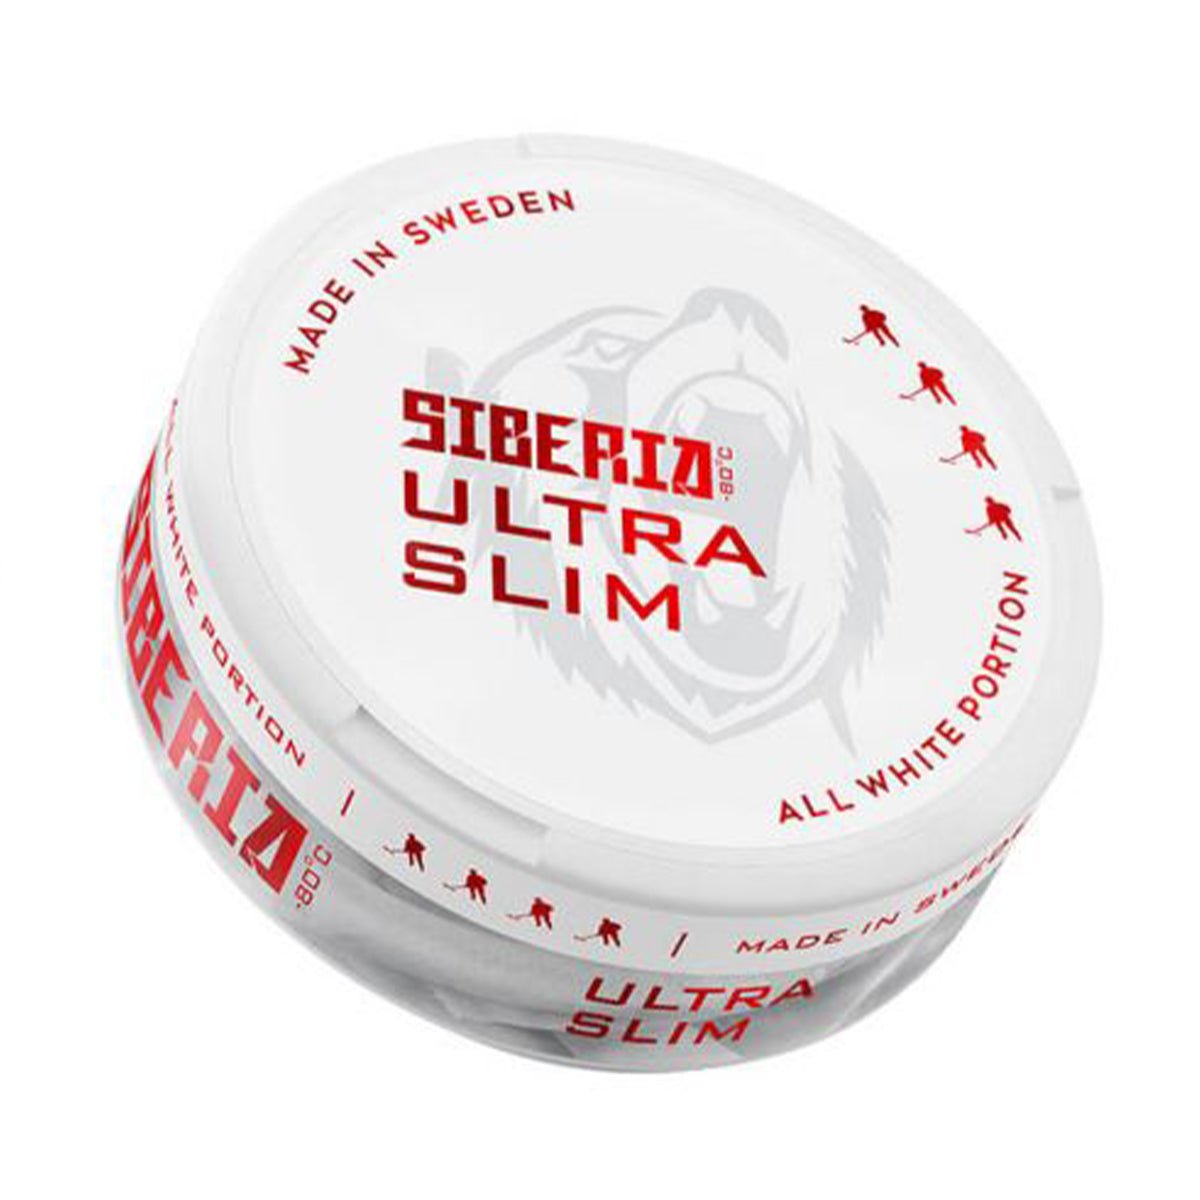 All White Ultra Slim Nicotine Pouches By Siberia - Prime Vapes UK